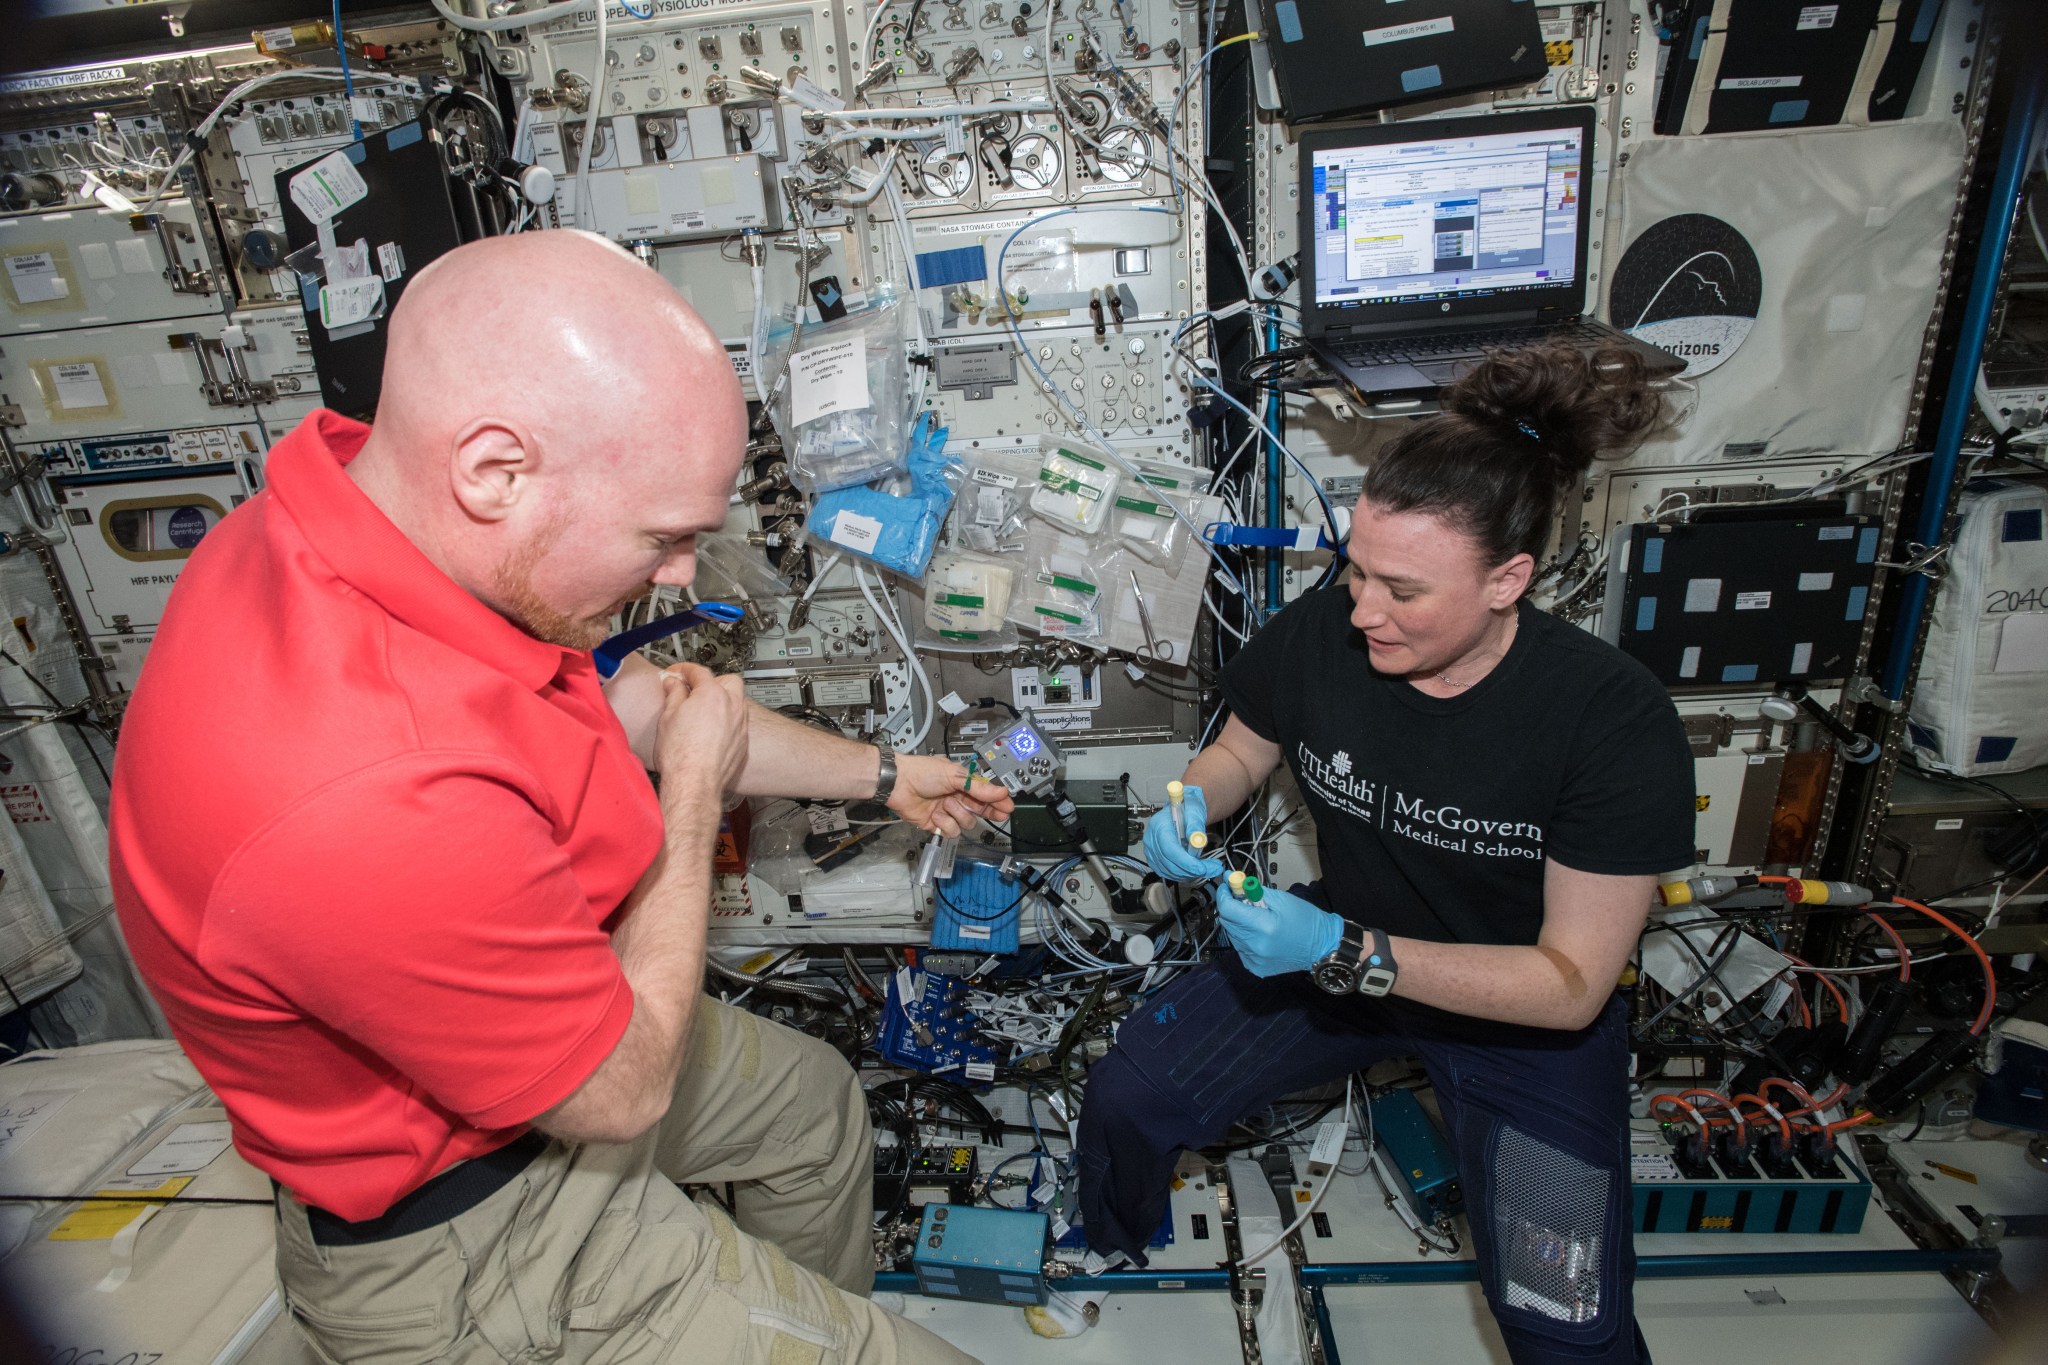 ESA (European Space Agency) astronaut Alexander Gerst and NASA astronaut Serena Auñón-Chancellor conduct a blood sample draw for Functional Immune, an investigation that analyzed the changes taking place in crew members’ immune systems during flight. Future analyses may use a new test developed for Immune Assay, which monitors how spaceflight affects immune function.